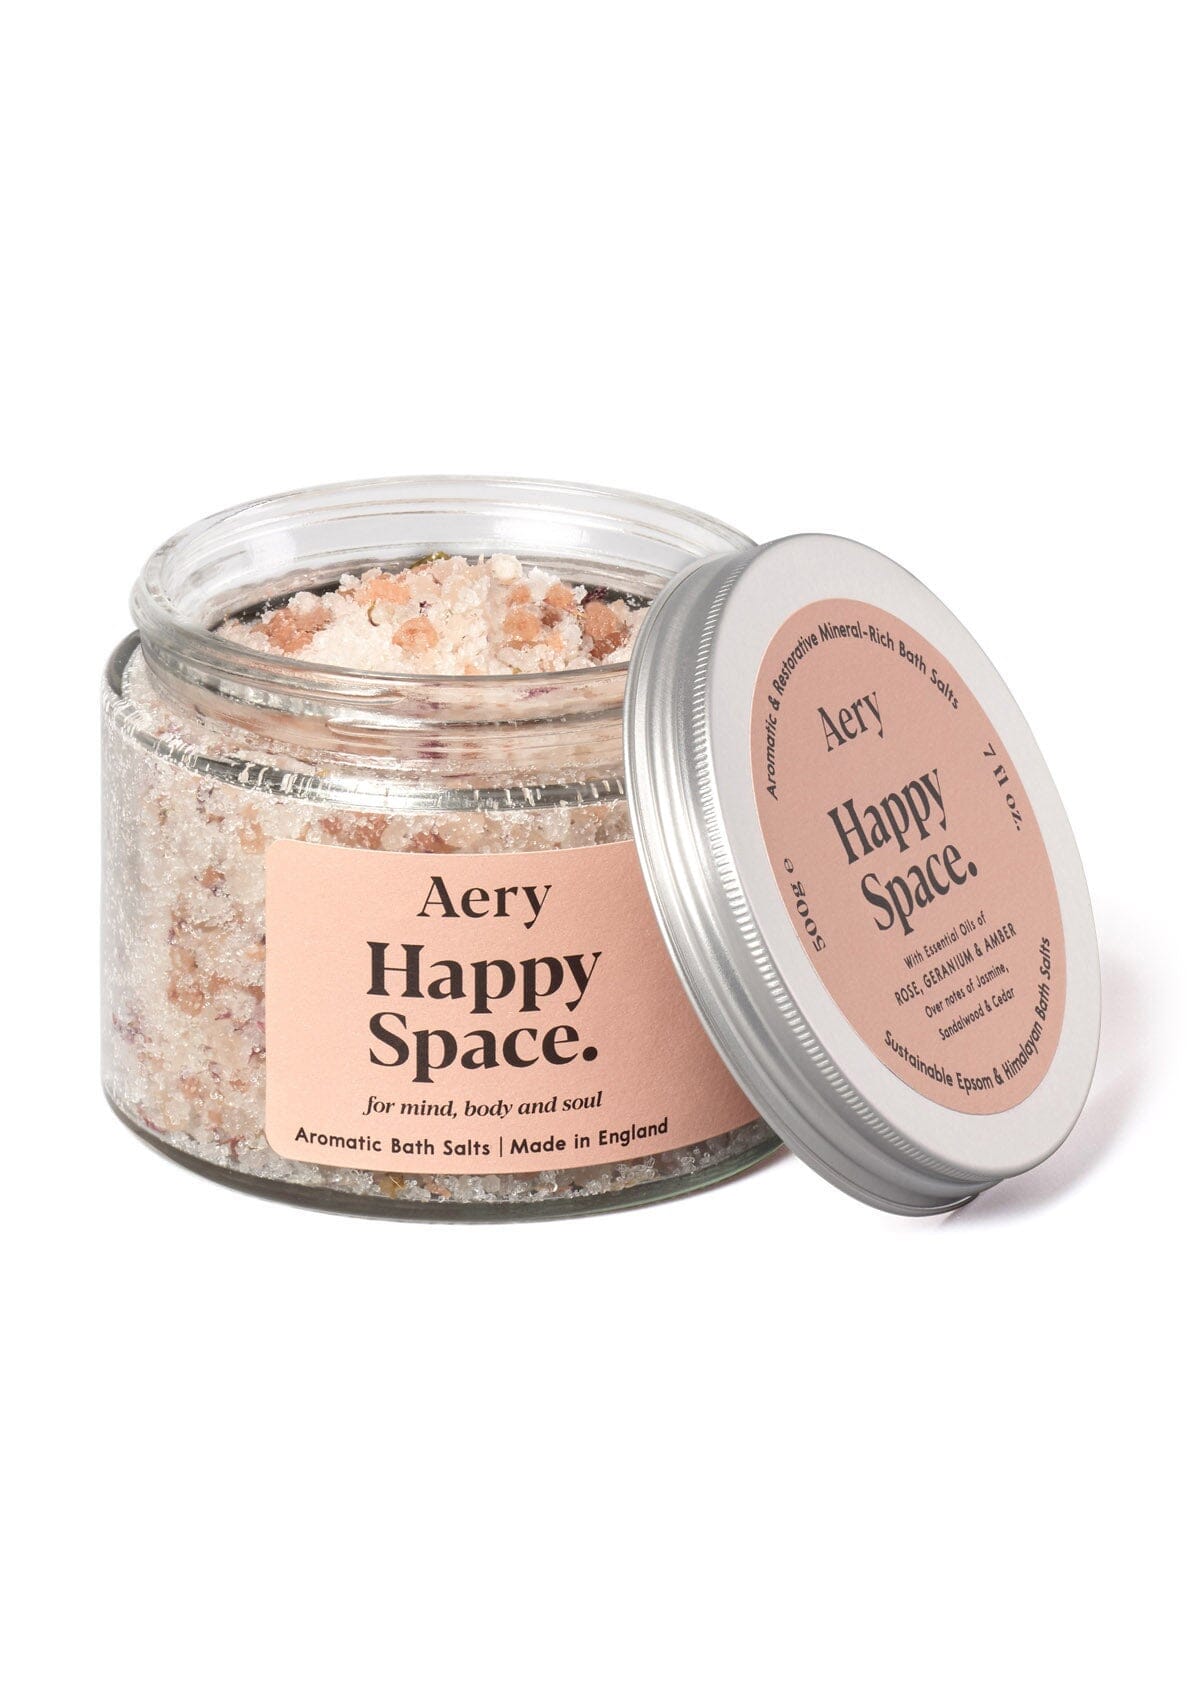 Pink Happy Space bath salts by Aery on White Background 